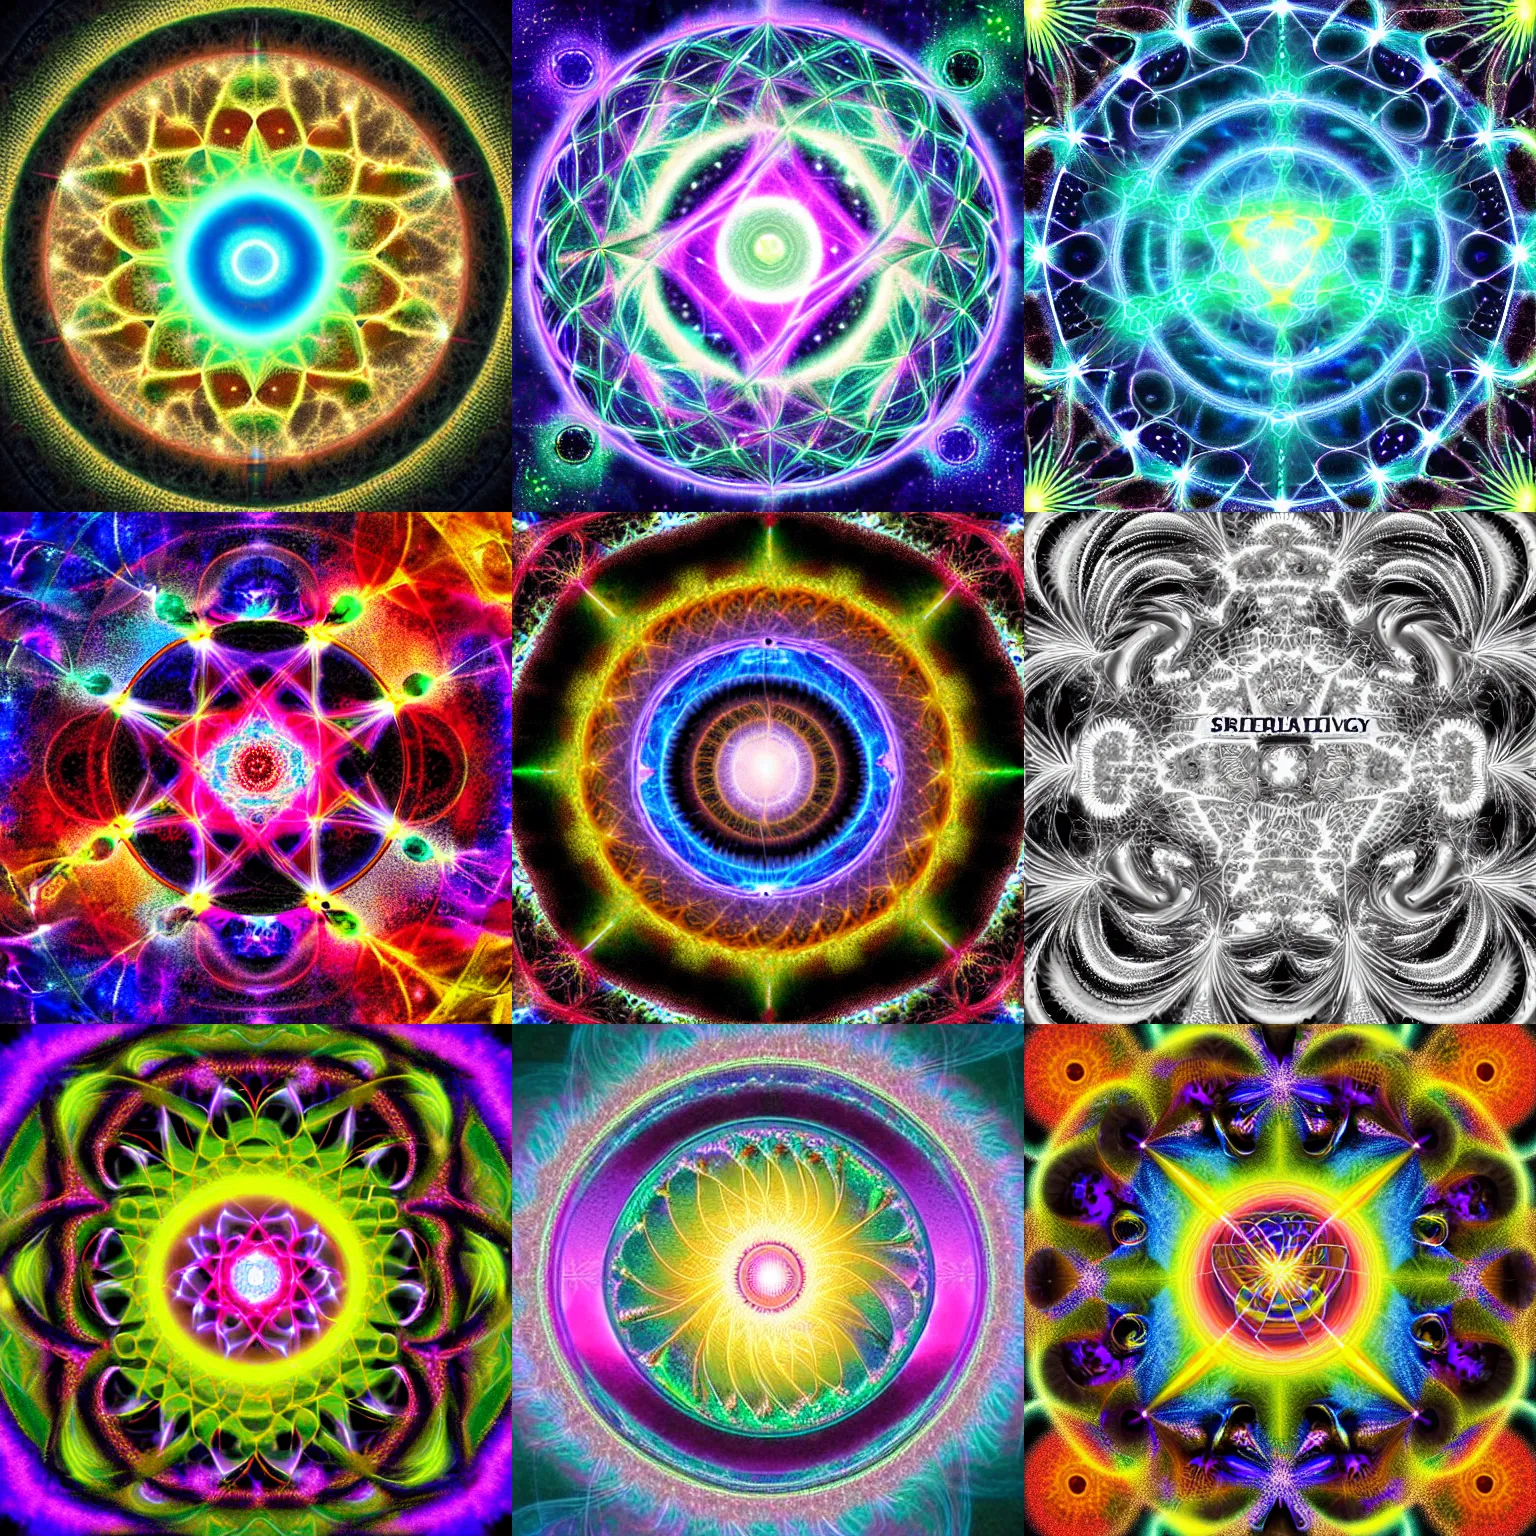 Prompt: creation of everything, fractal universe, energy, frequency and vibration, spiral out, third eye, we are one meta organism, we are god